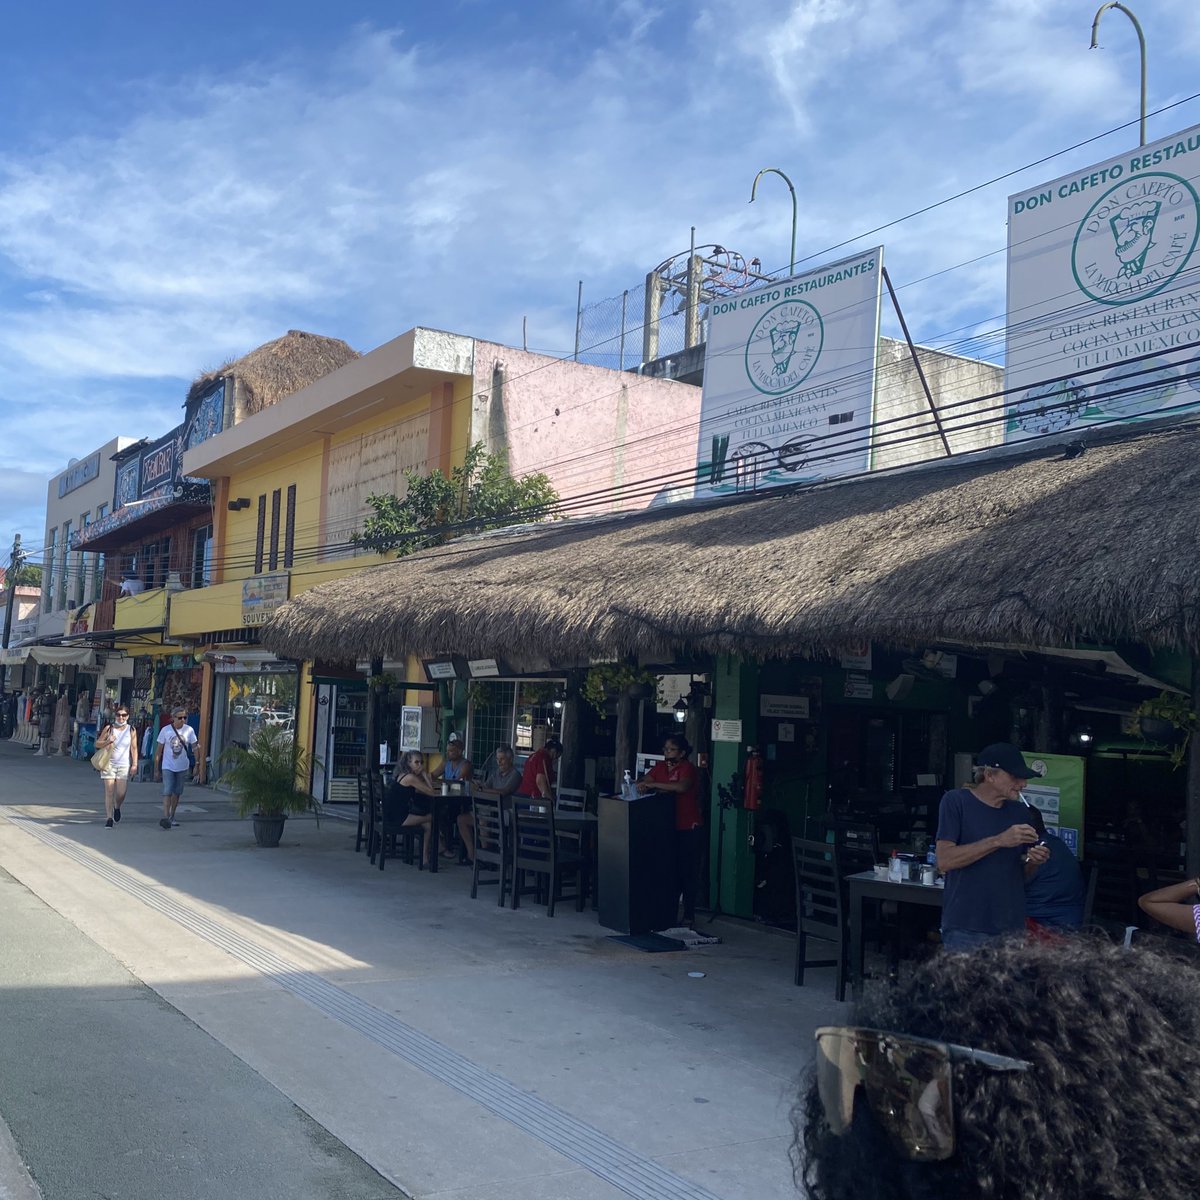 Another place to eat is Don Cafeto. They have amazing breakfast and lunch. More street food, outdoor seating, and live music. Right on the “strip”.